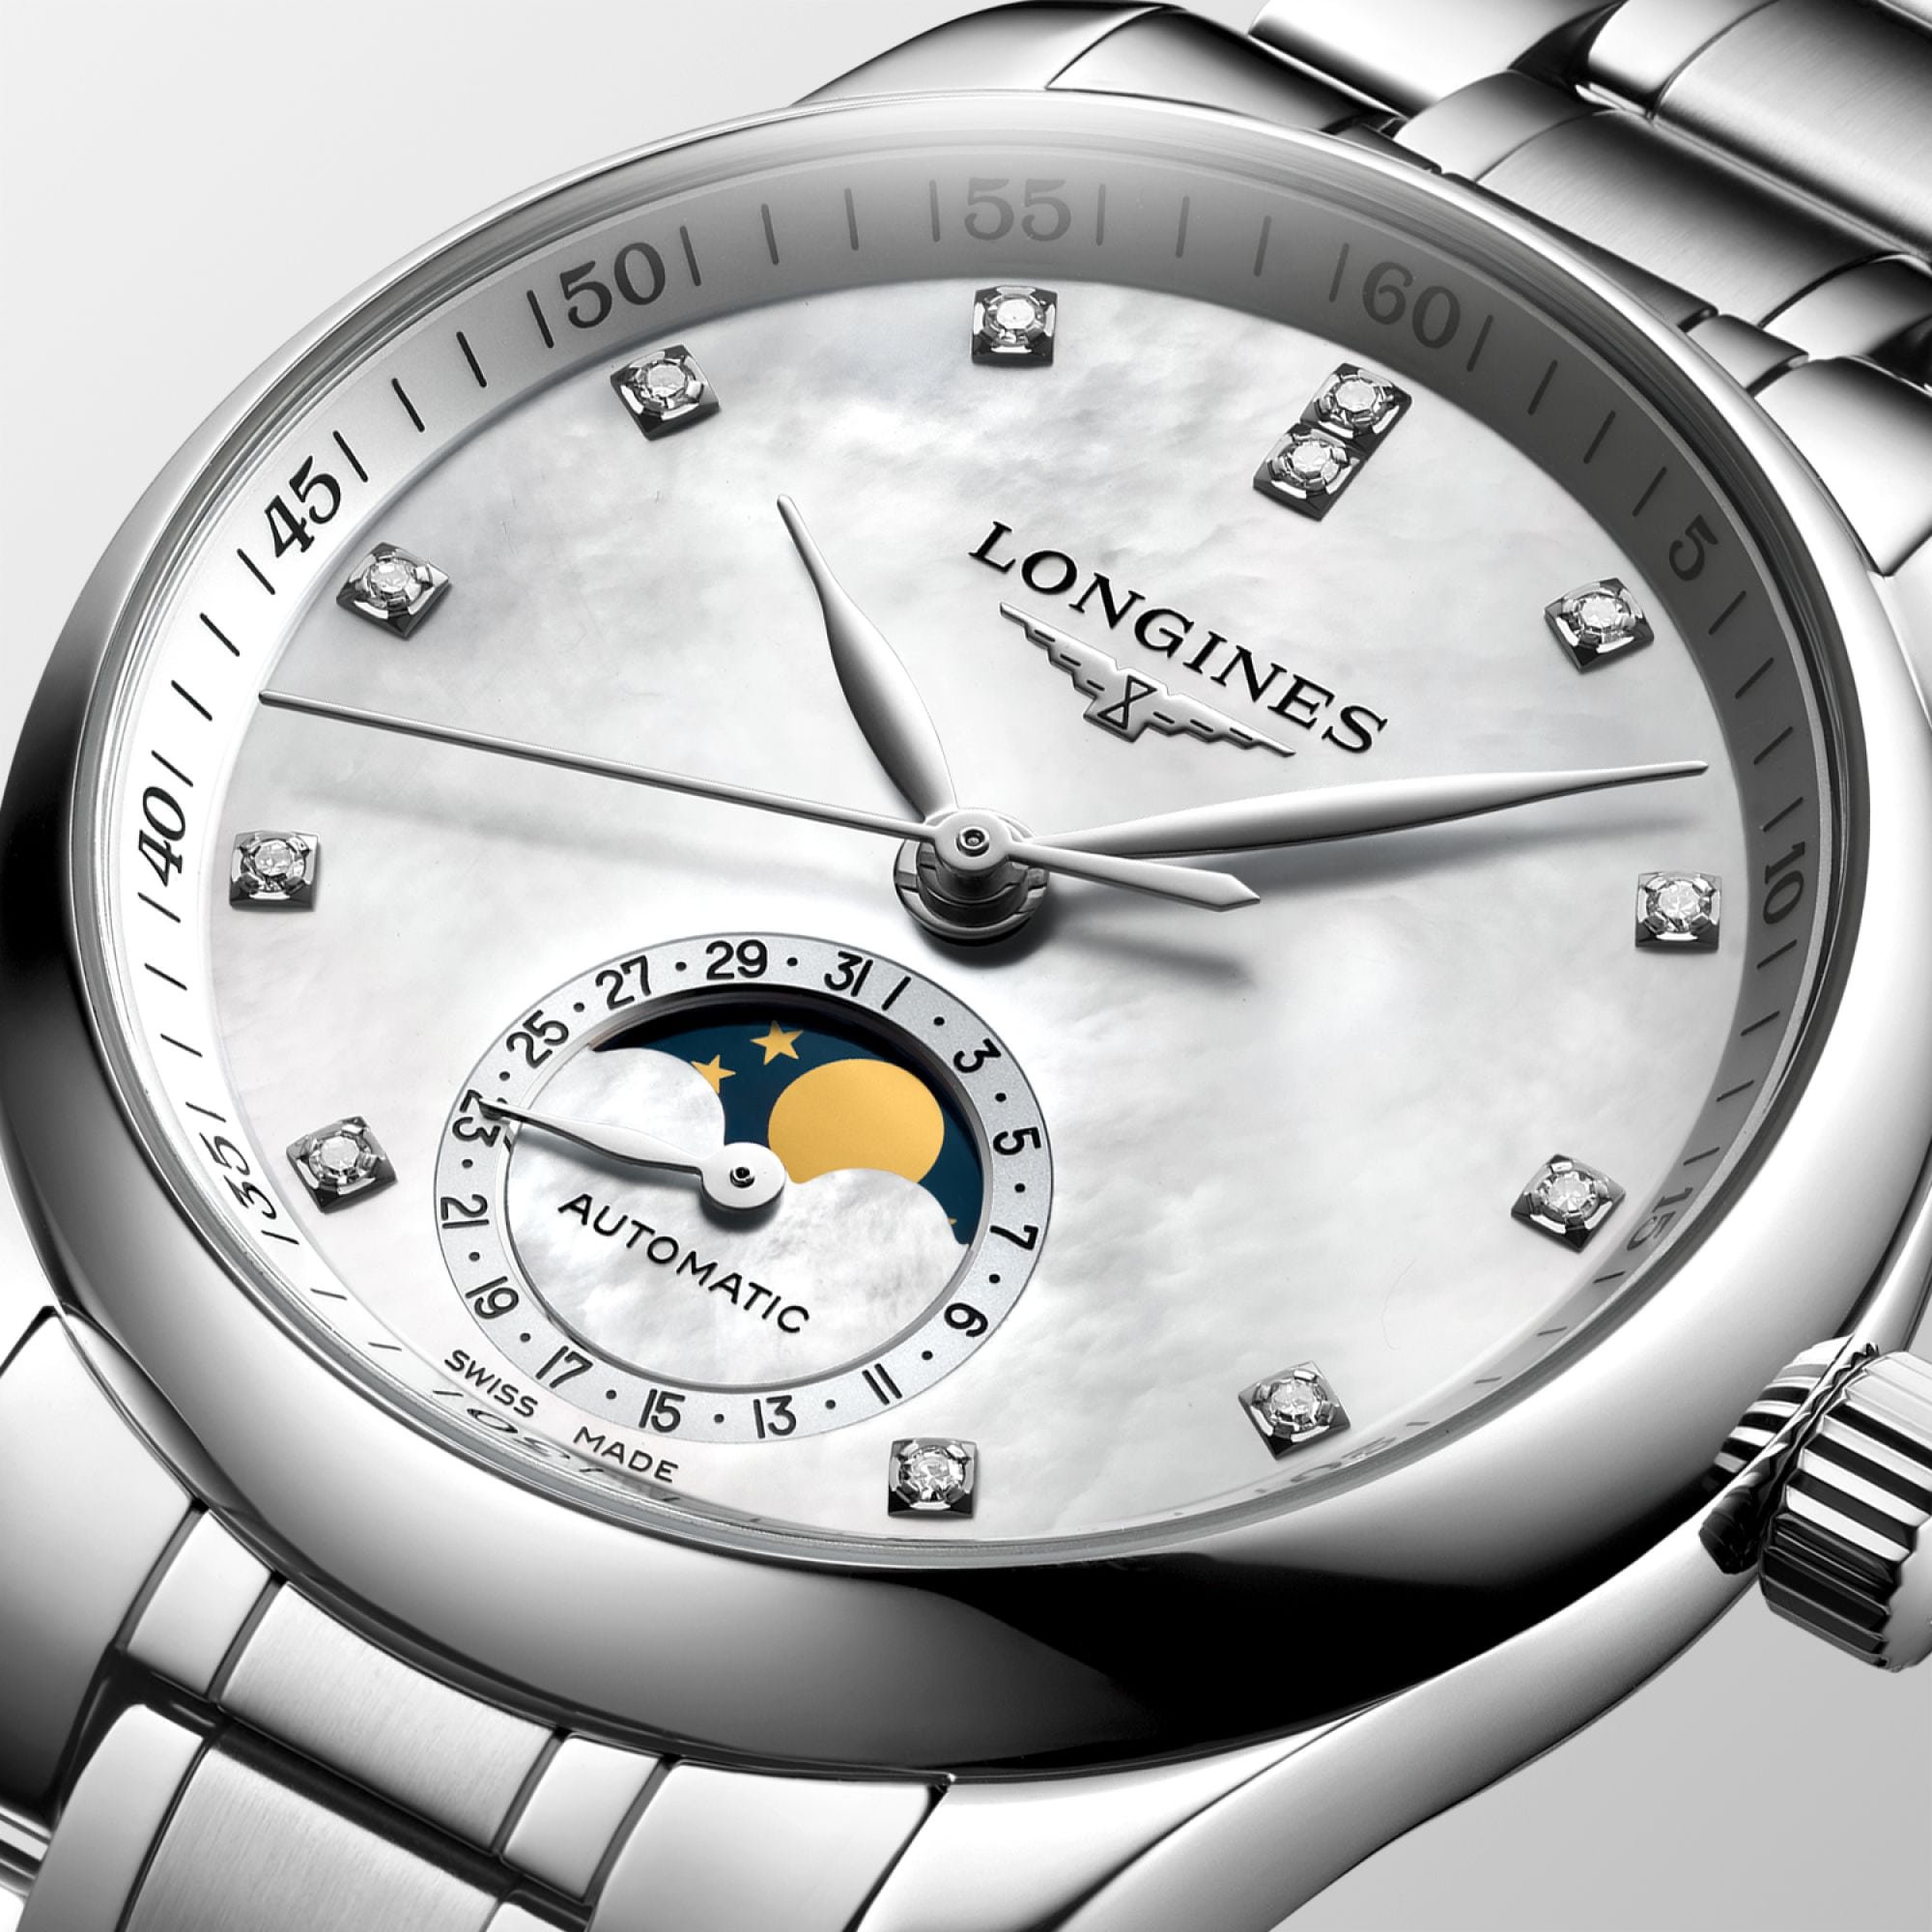 The Longines Master Collection L2.409.4.87.6